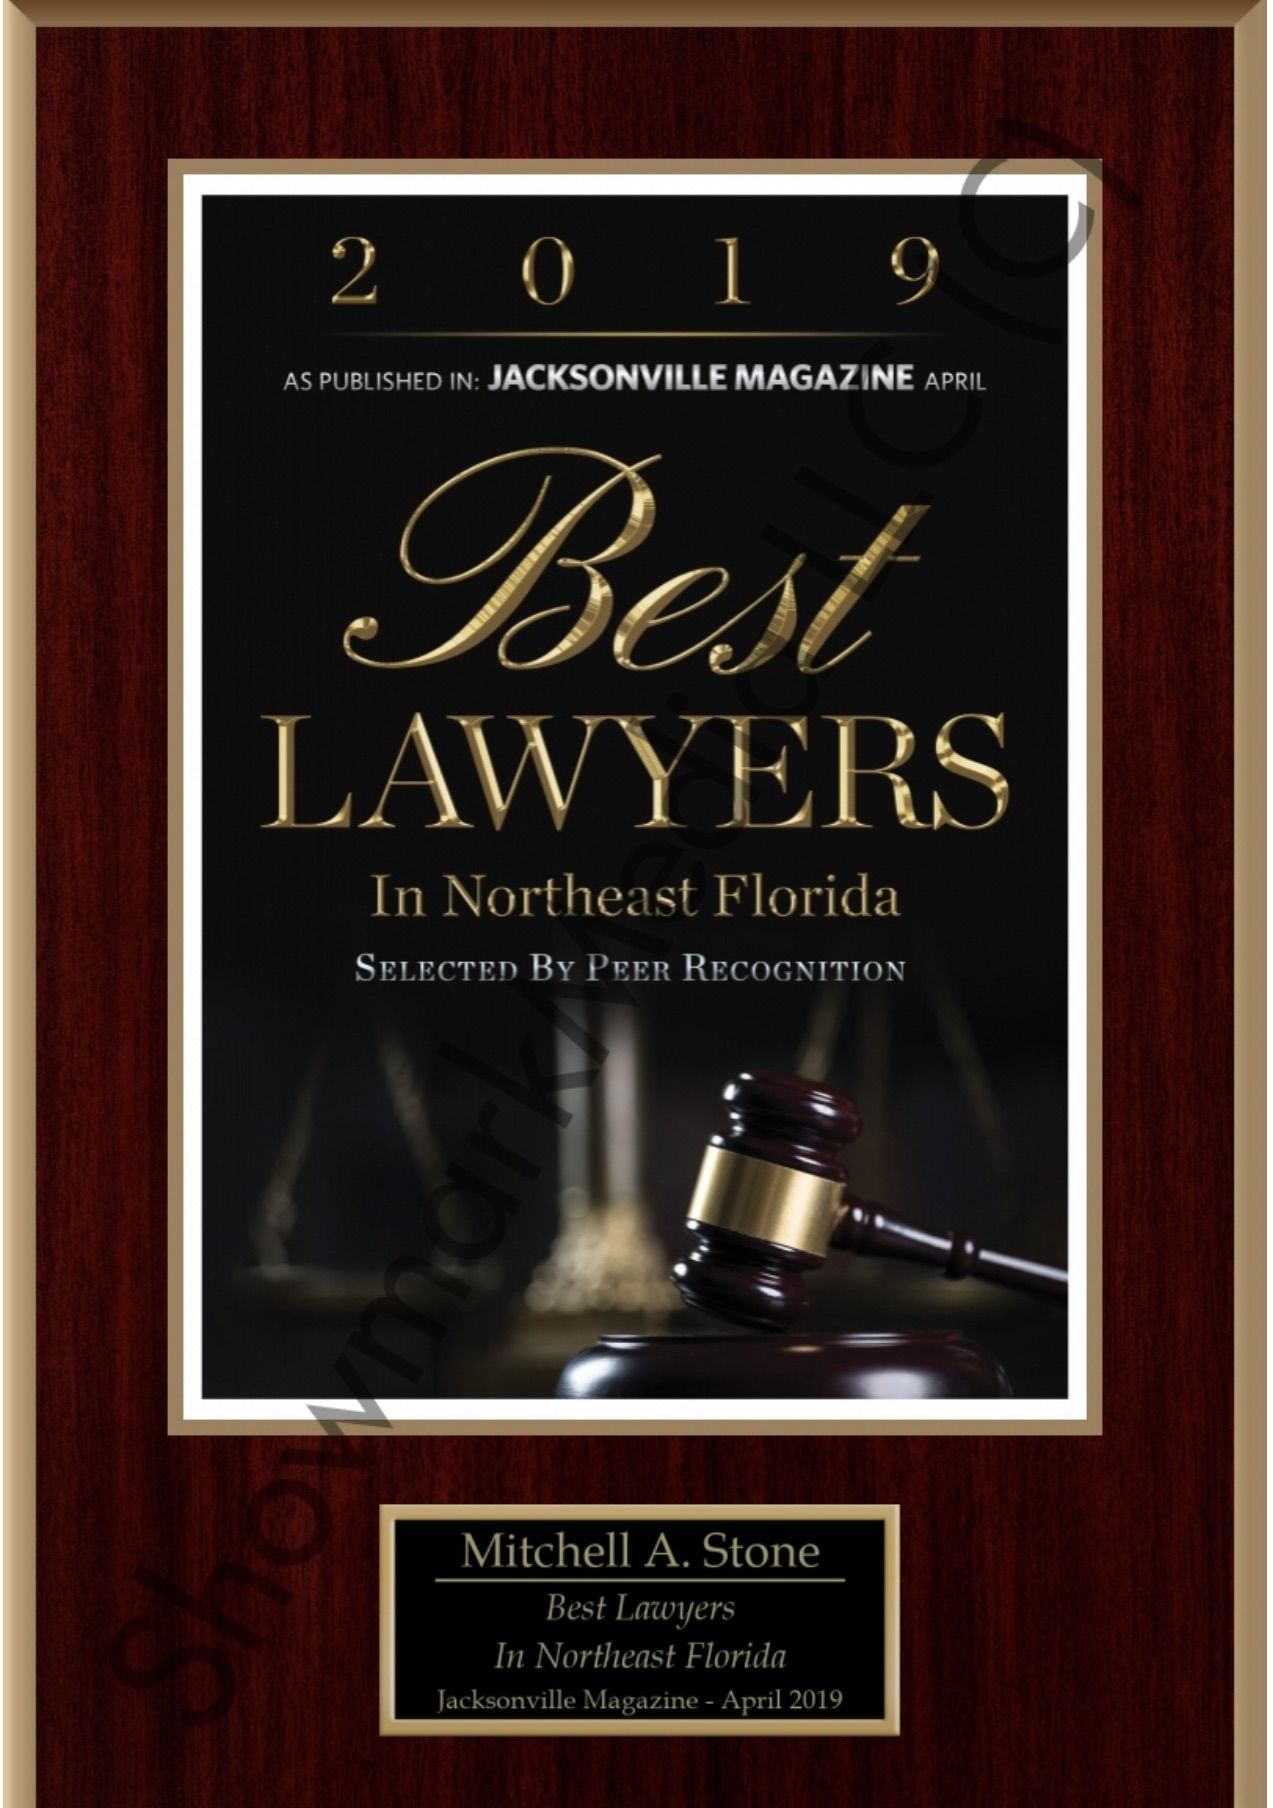 Mitch Stone named Best Lawyers in Northeast Florida 2019